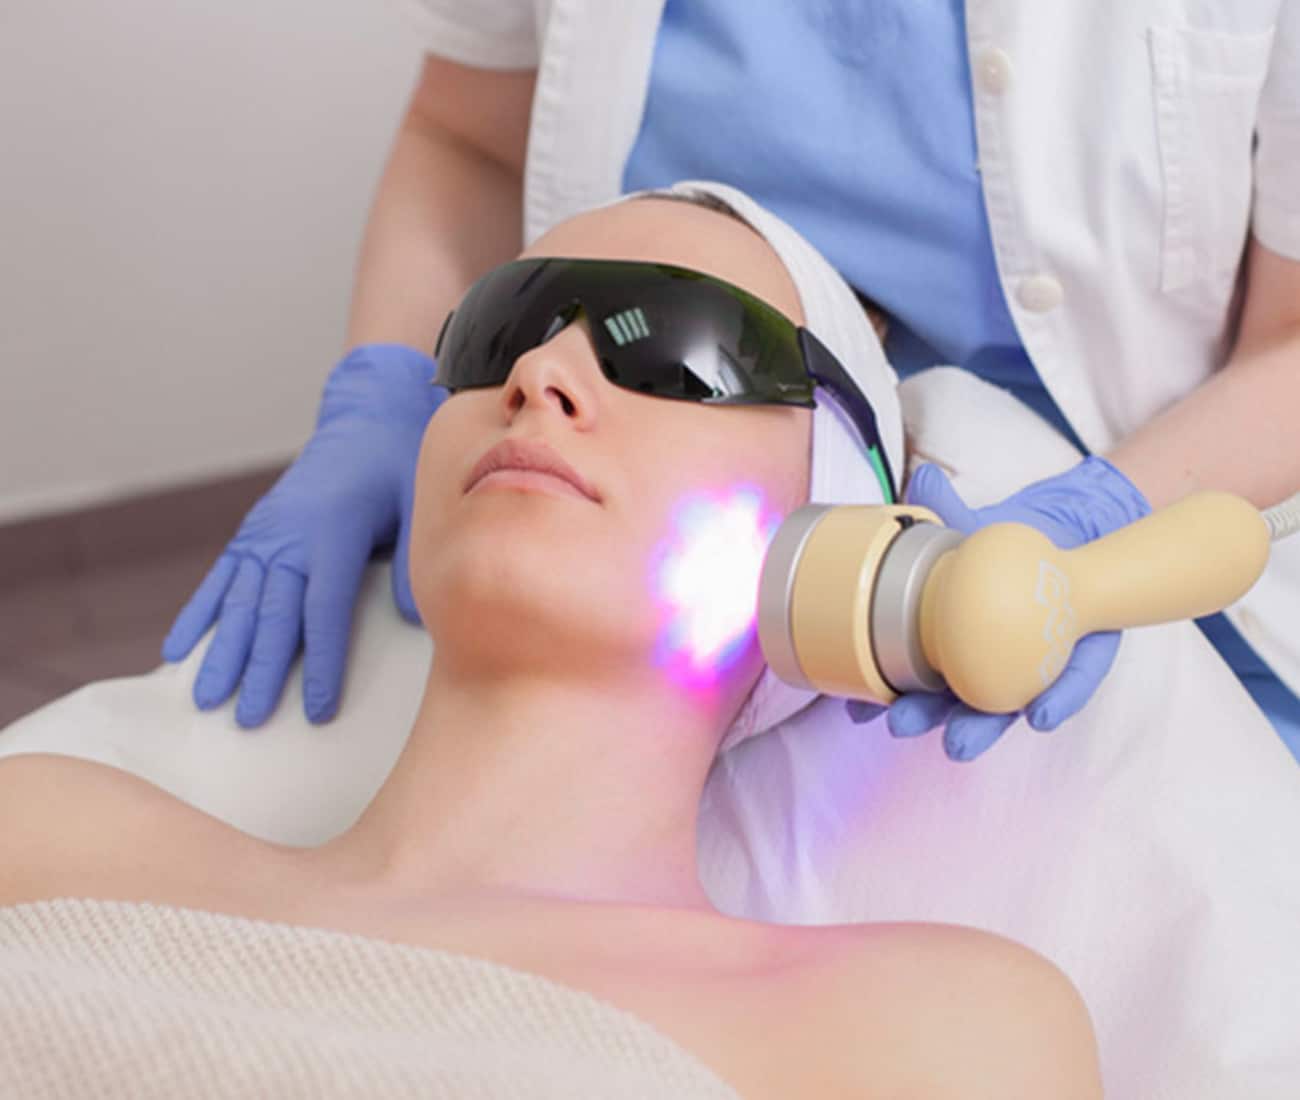 a person lying on a bed receiving intense pulsed light treatment on face